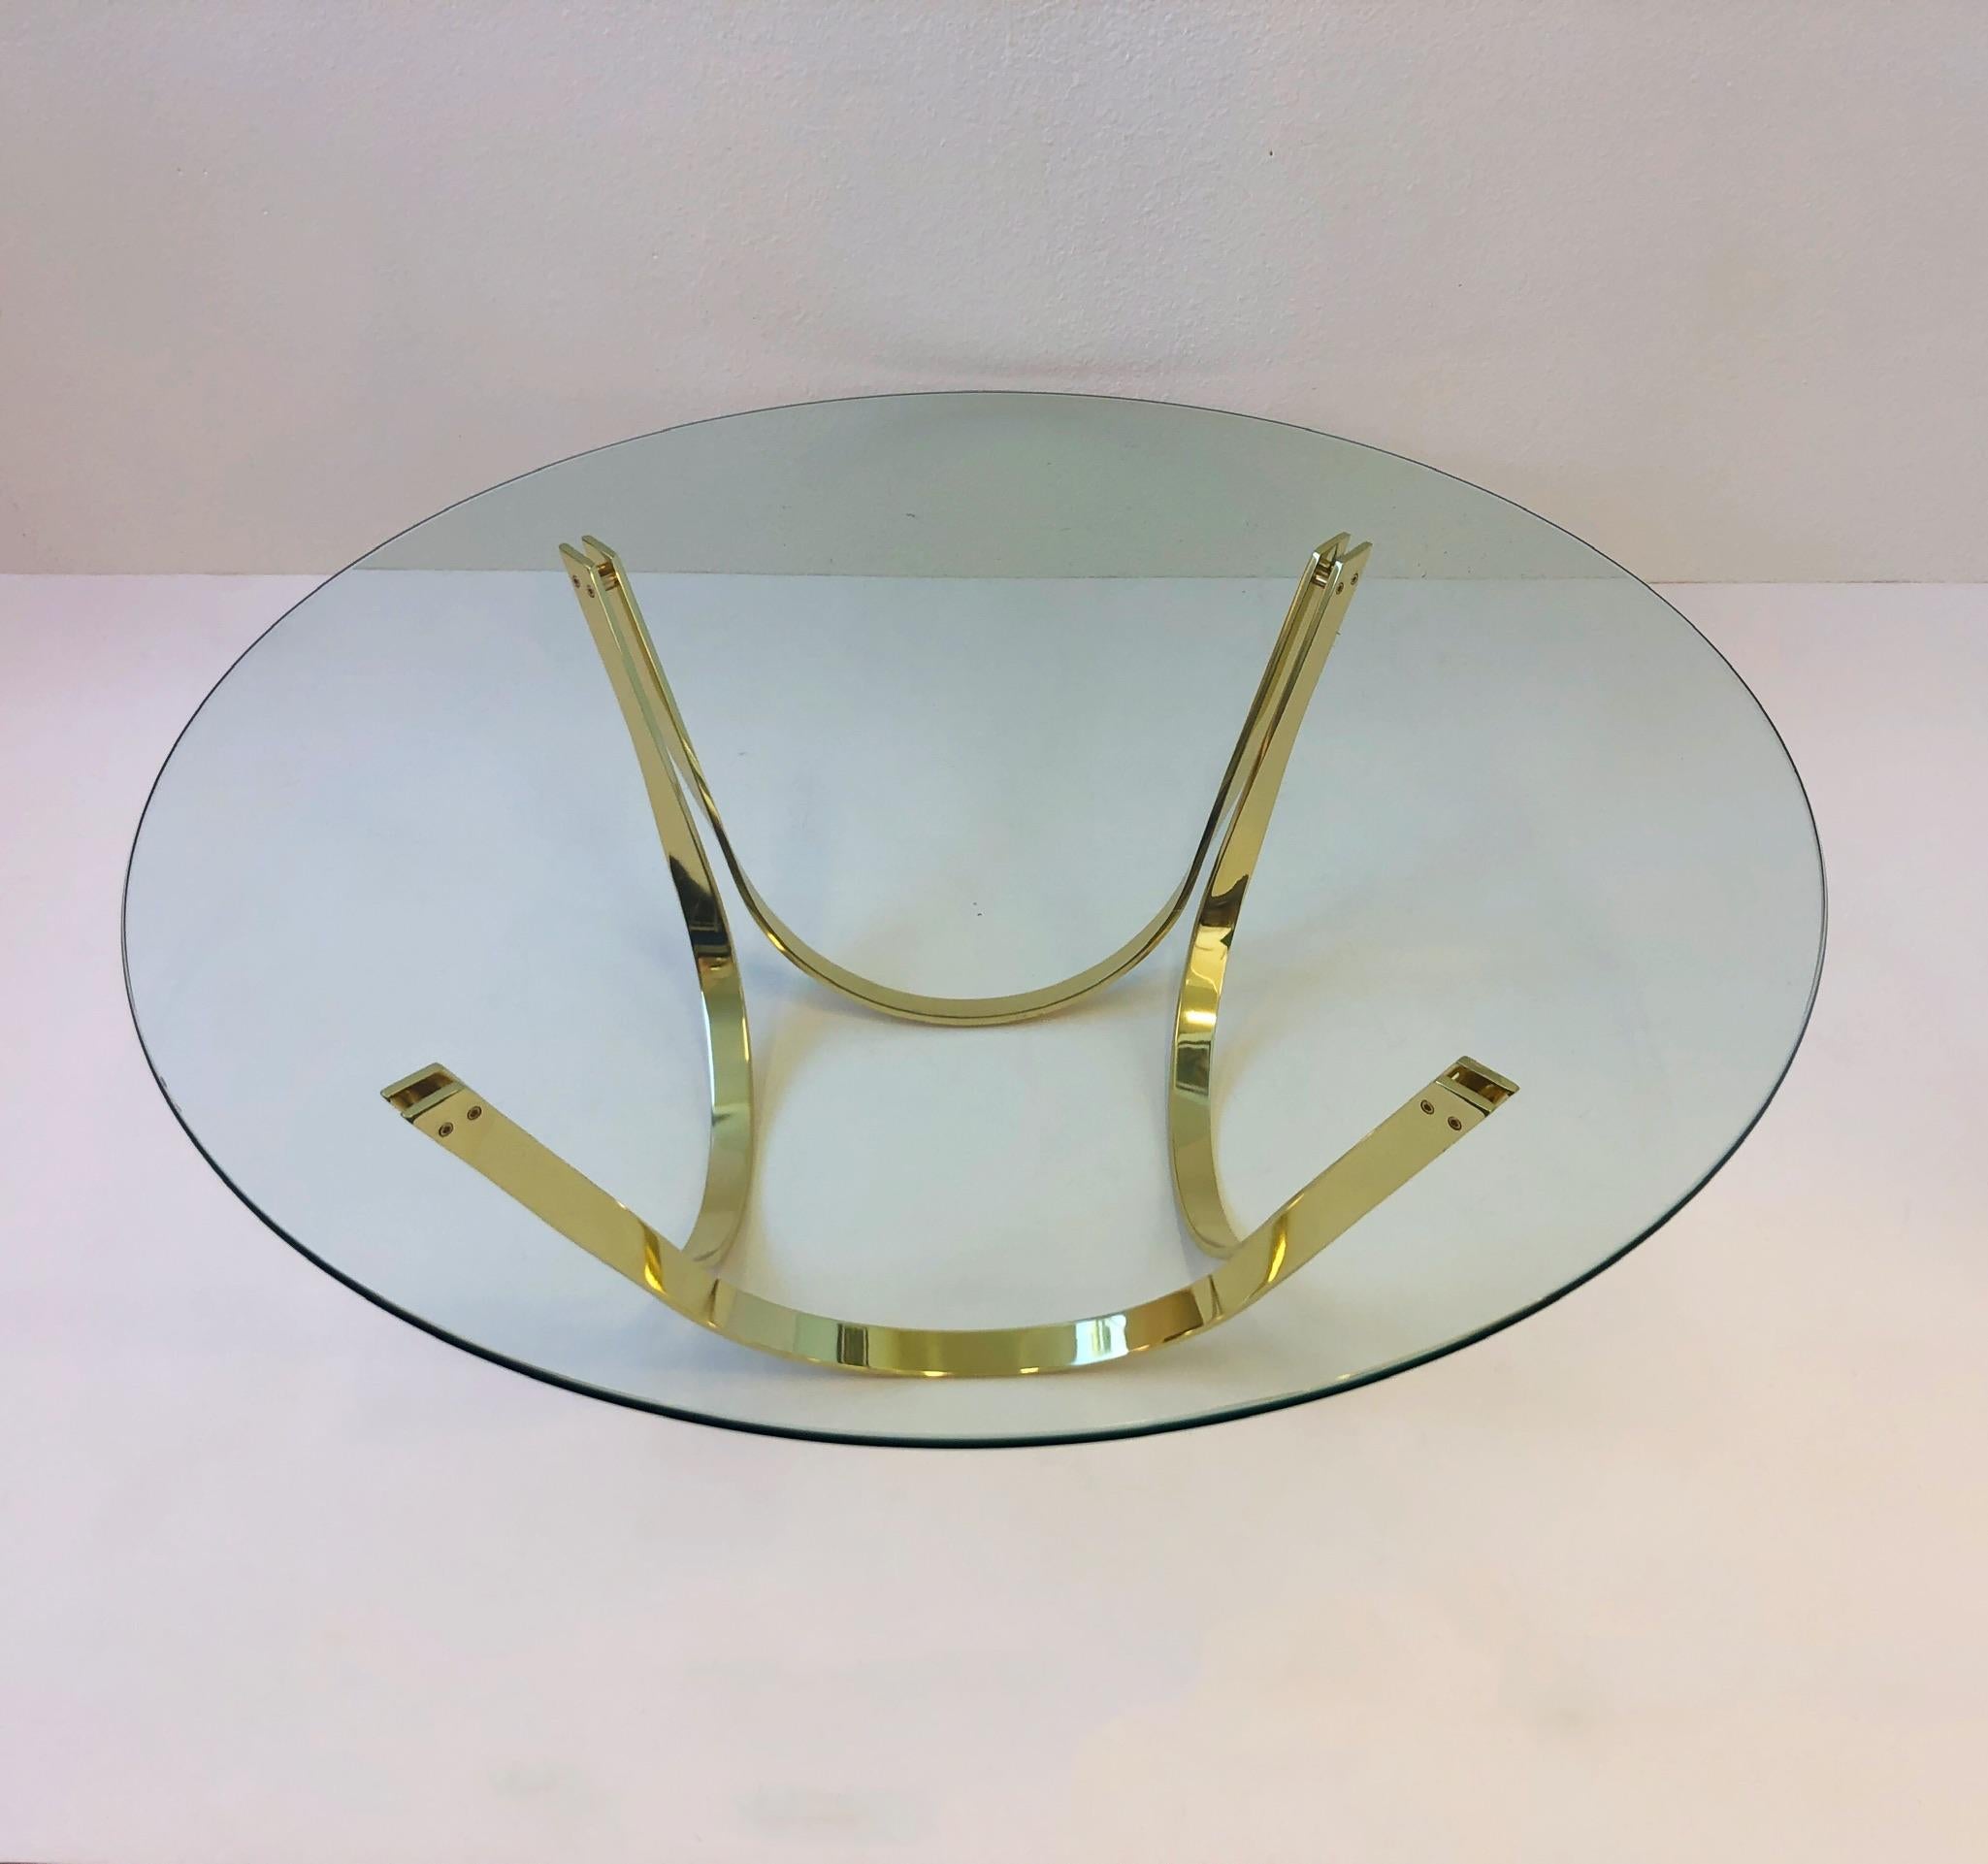 A spectacular polish brass and glass cocktail table design in the 1970s by Tri-Mark.
The table has a new 1/2” thick 48” diameter glass top. The base is in great condition with some minor wear (see detail photos).
Dimensions: 17.25” high, 48”